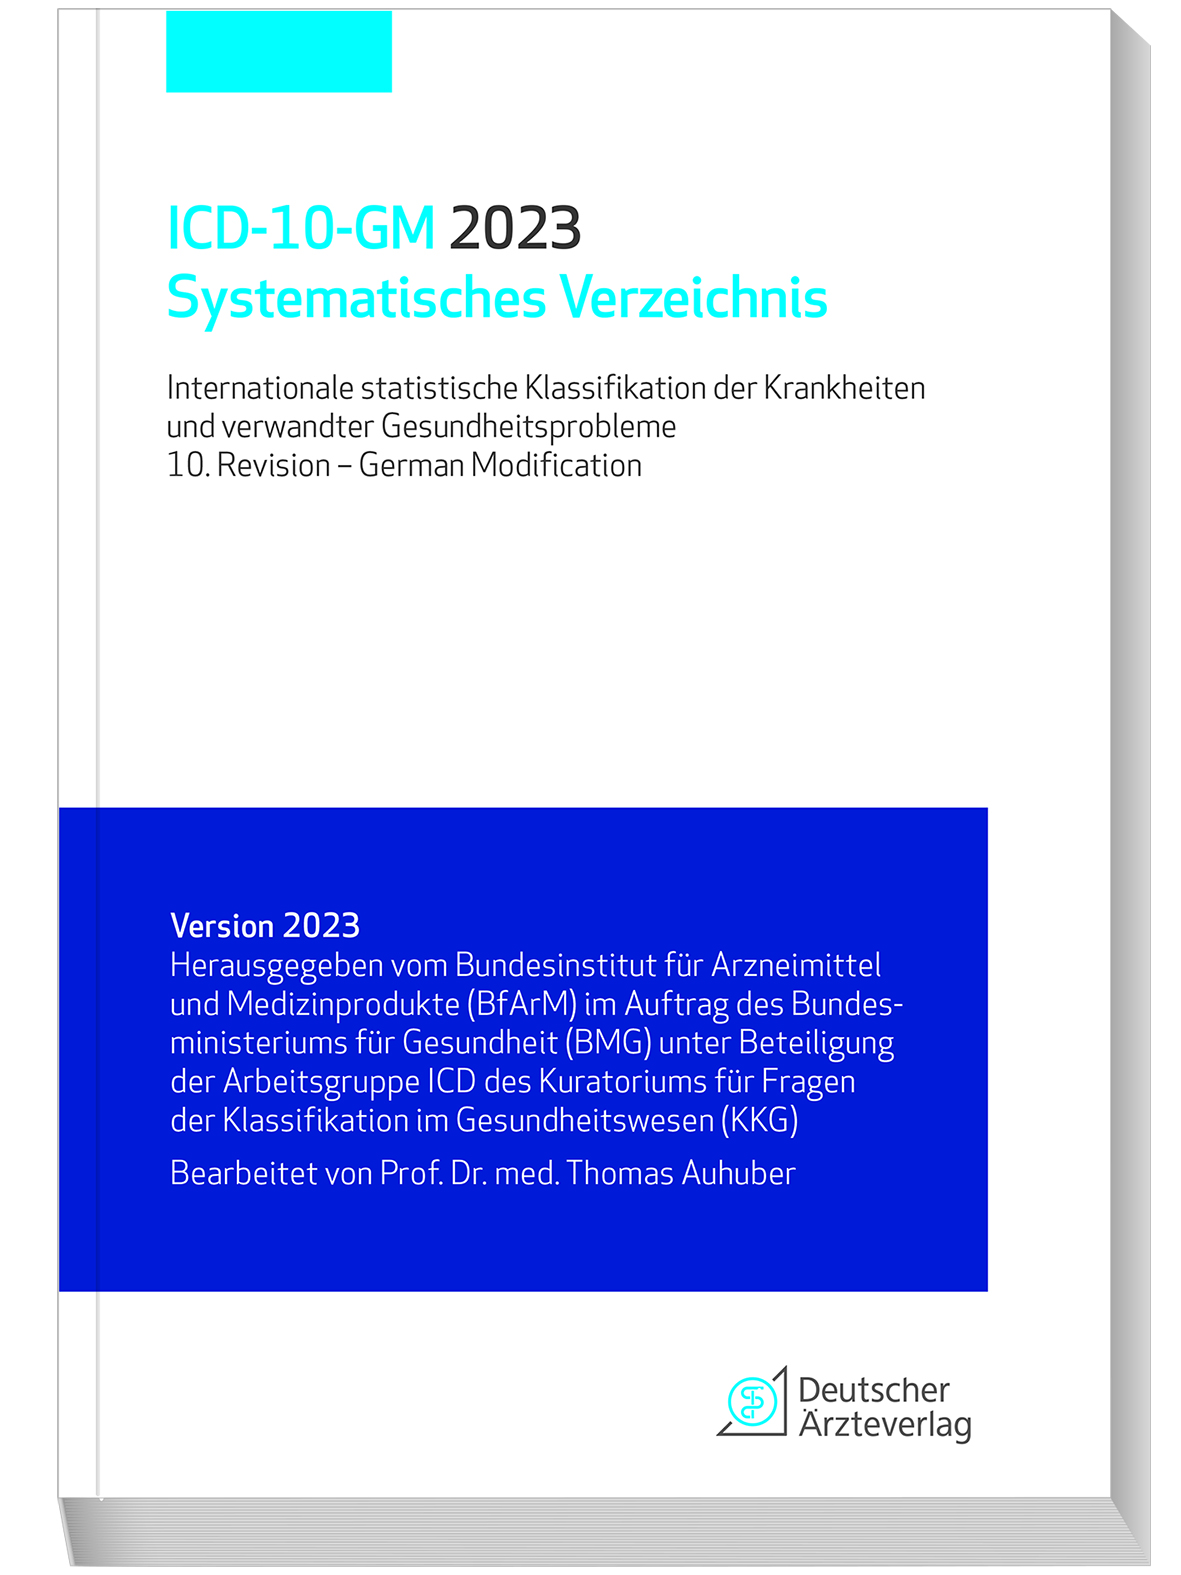 ICD-10-GM sys. VZ